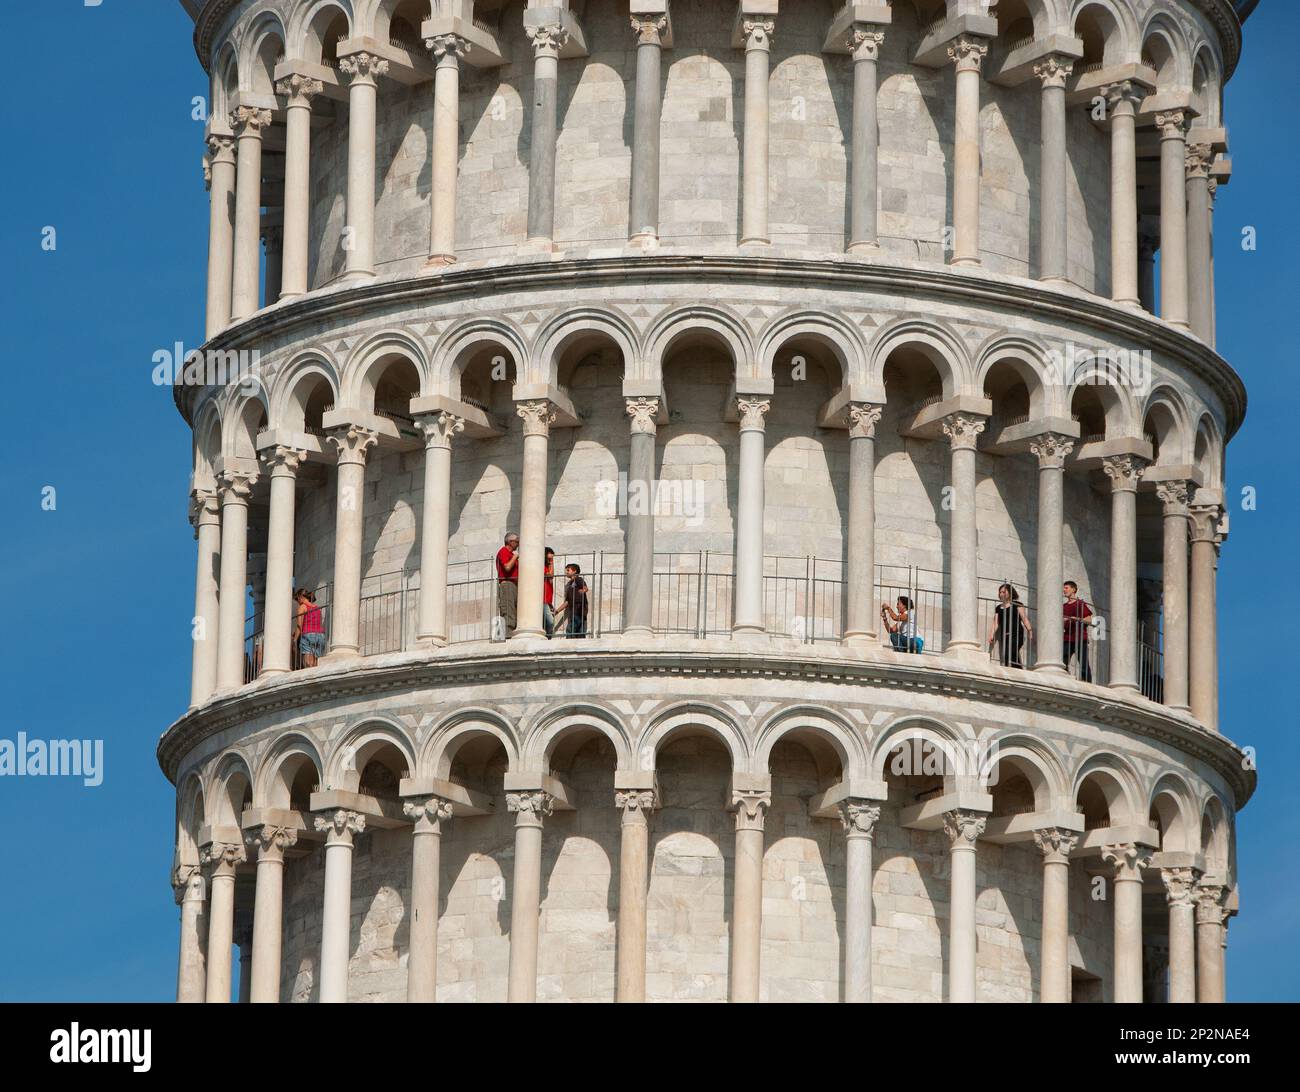 Leaning Tower of Pisa Detail with tourists Stock Photo